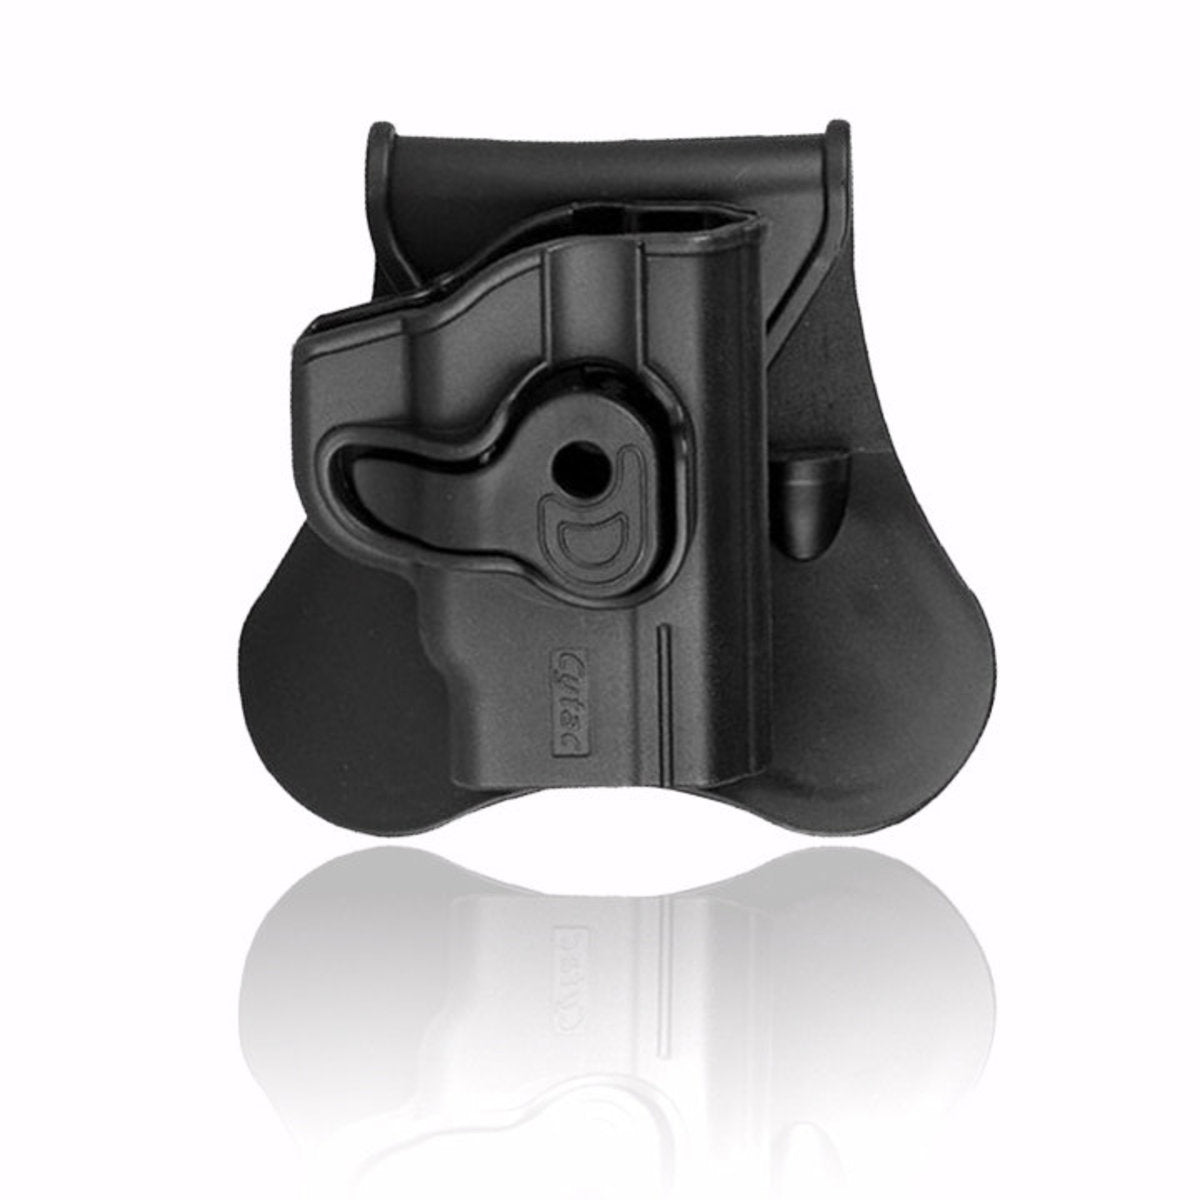 Cytac Owb Holster - Fits S&W Bodyguard 380 With Integrated Crimson Trace Laser